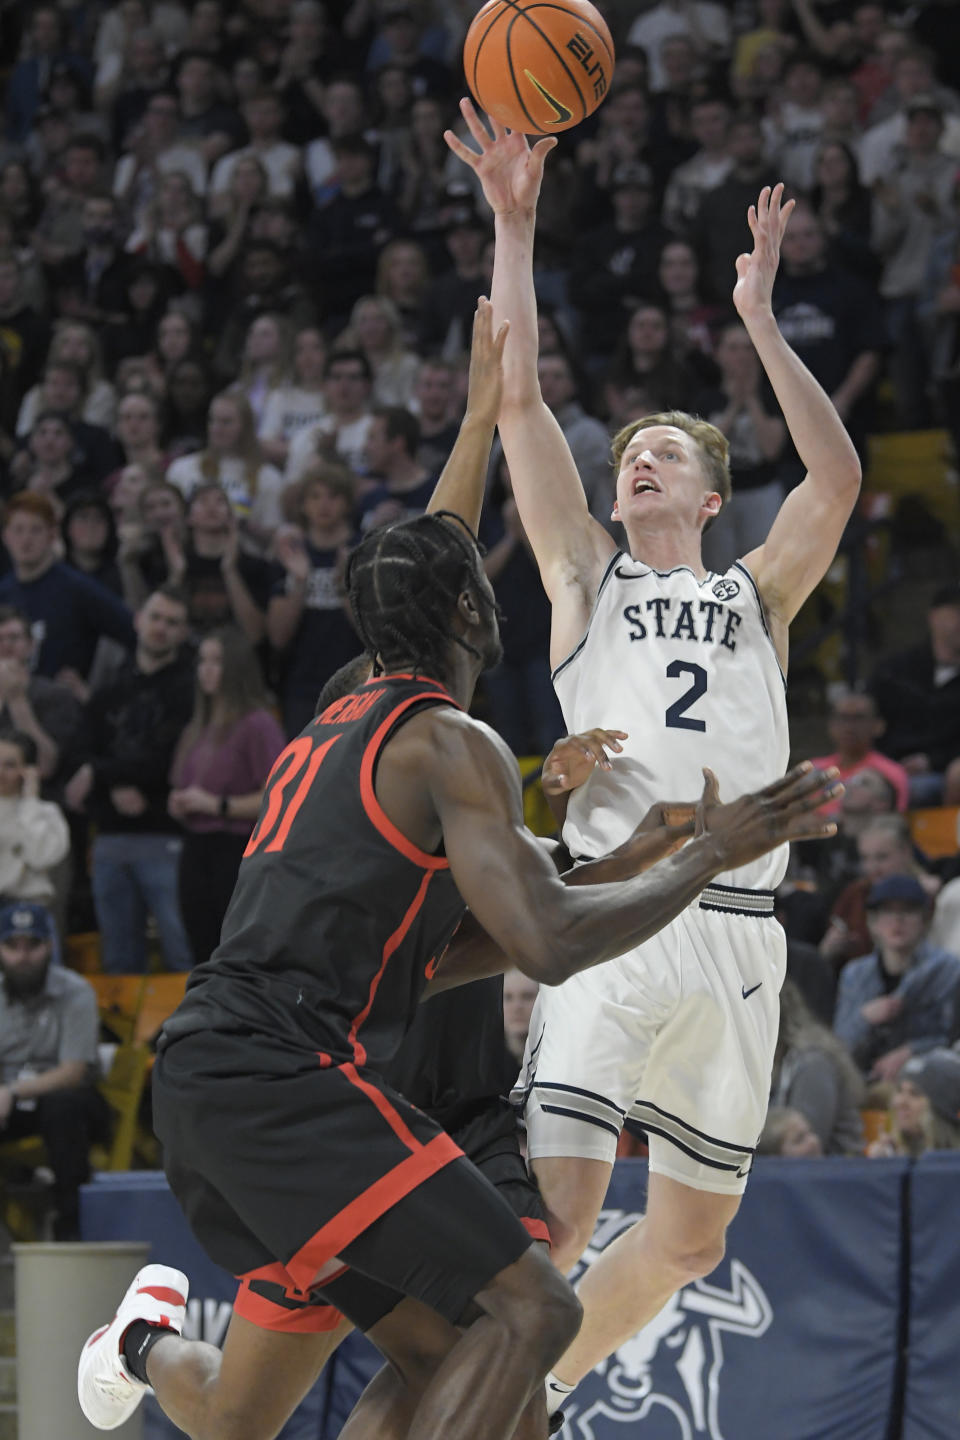 Utah State guard Sean Bairstow (2) shoots as San Diego State forward Nathan Mensah (31) defends during the second half of an NCAA college basketball game Wednesday, Feb. 8, 2023, in Logan, Utah. (AP Photo/Eli Lucero)